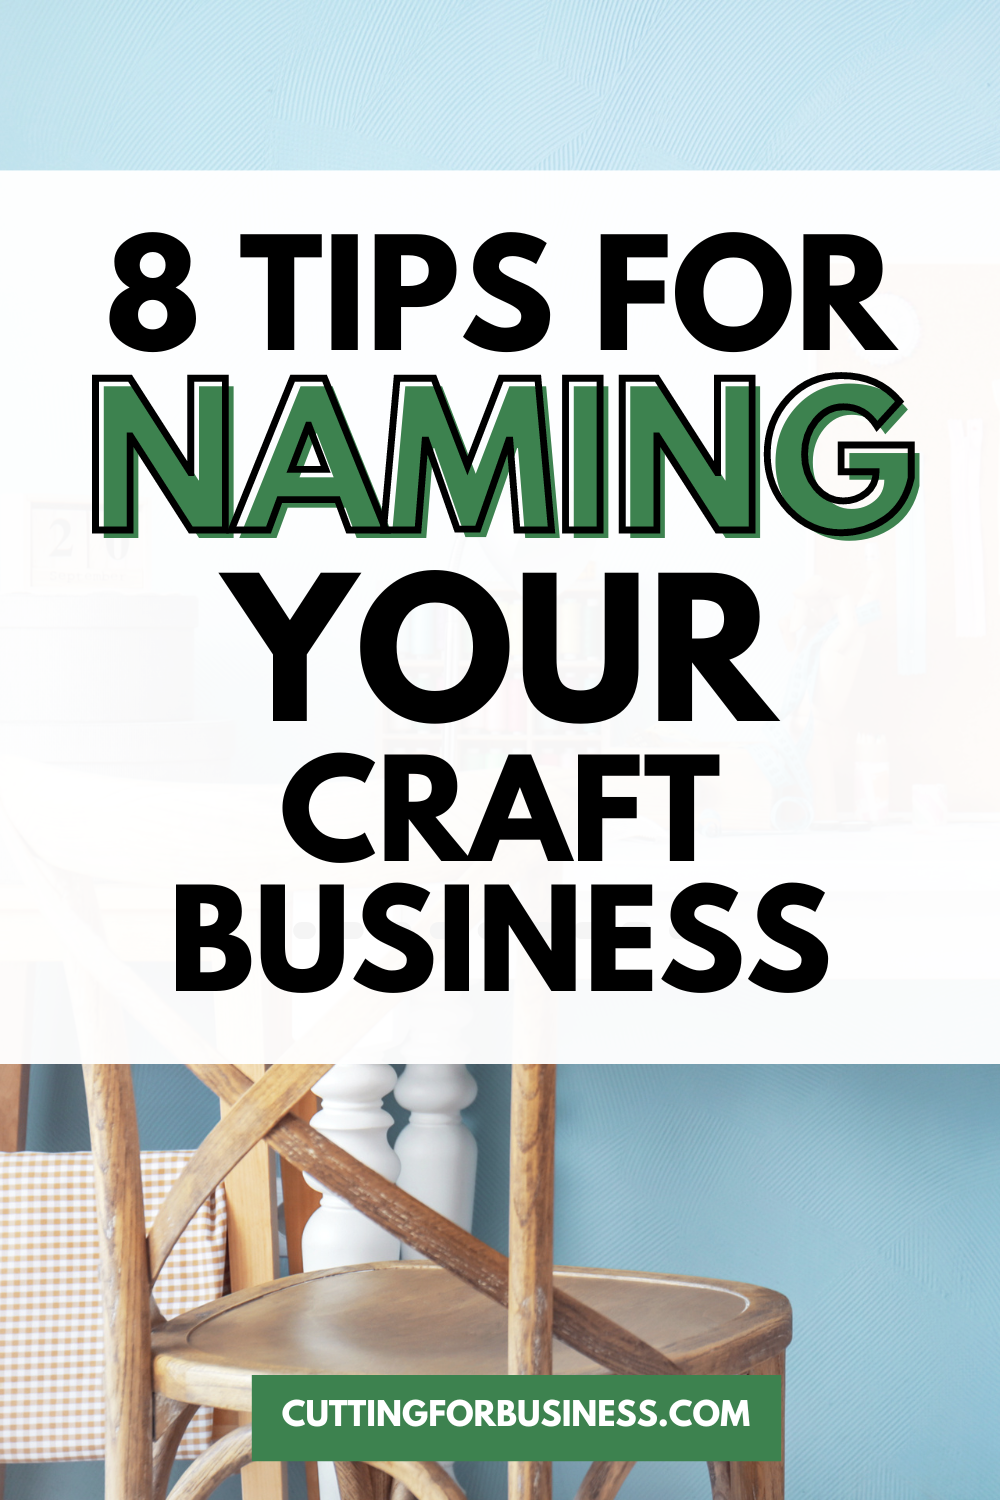 8 Tips for Naming Your Craft Business - A good read for Silhouette and Cricut crafters - by cuttingforbusiness.com.